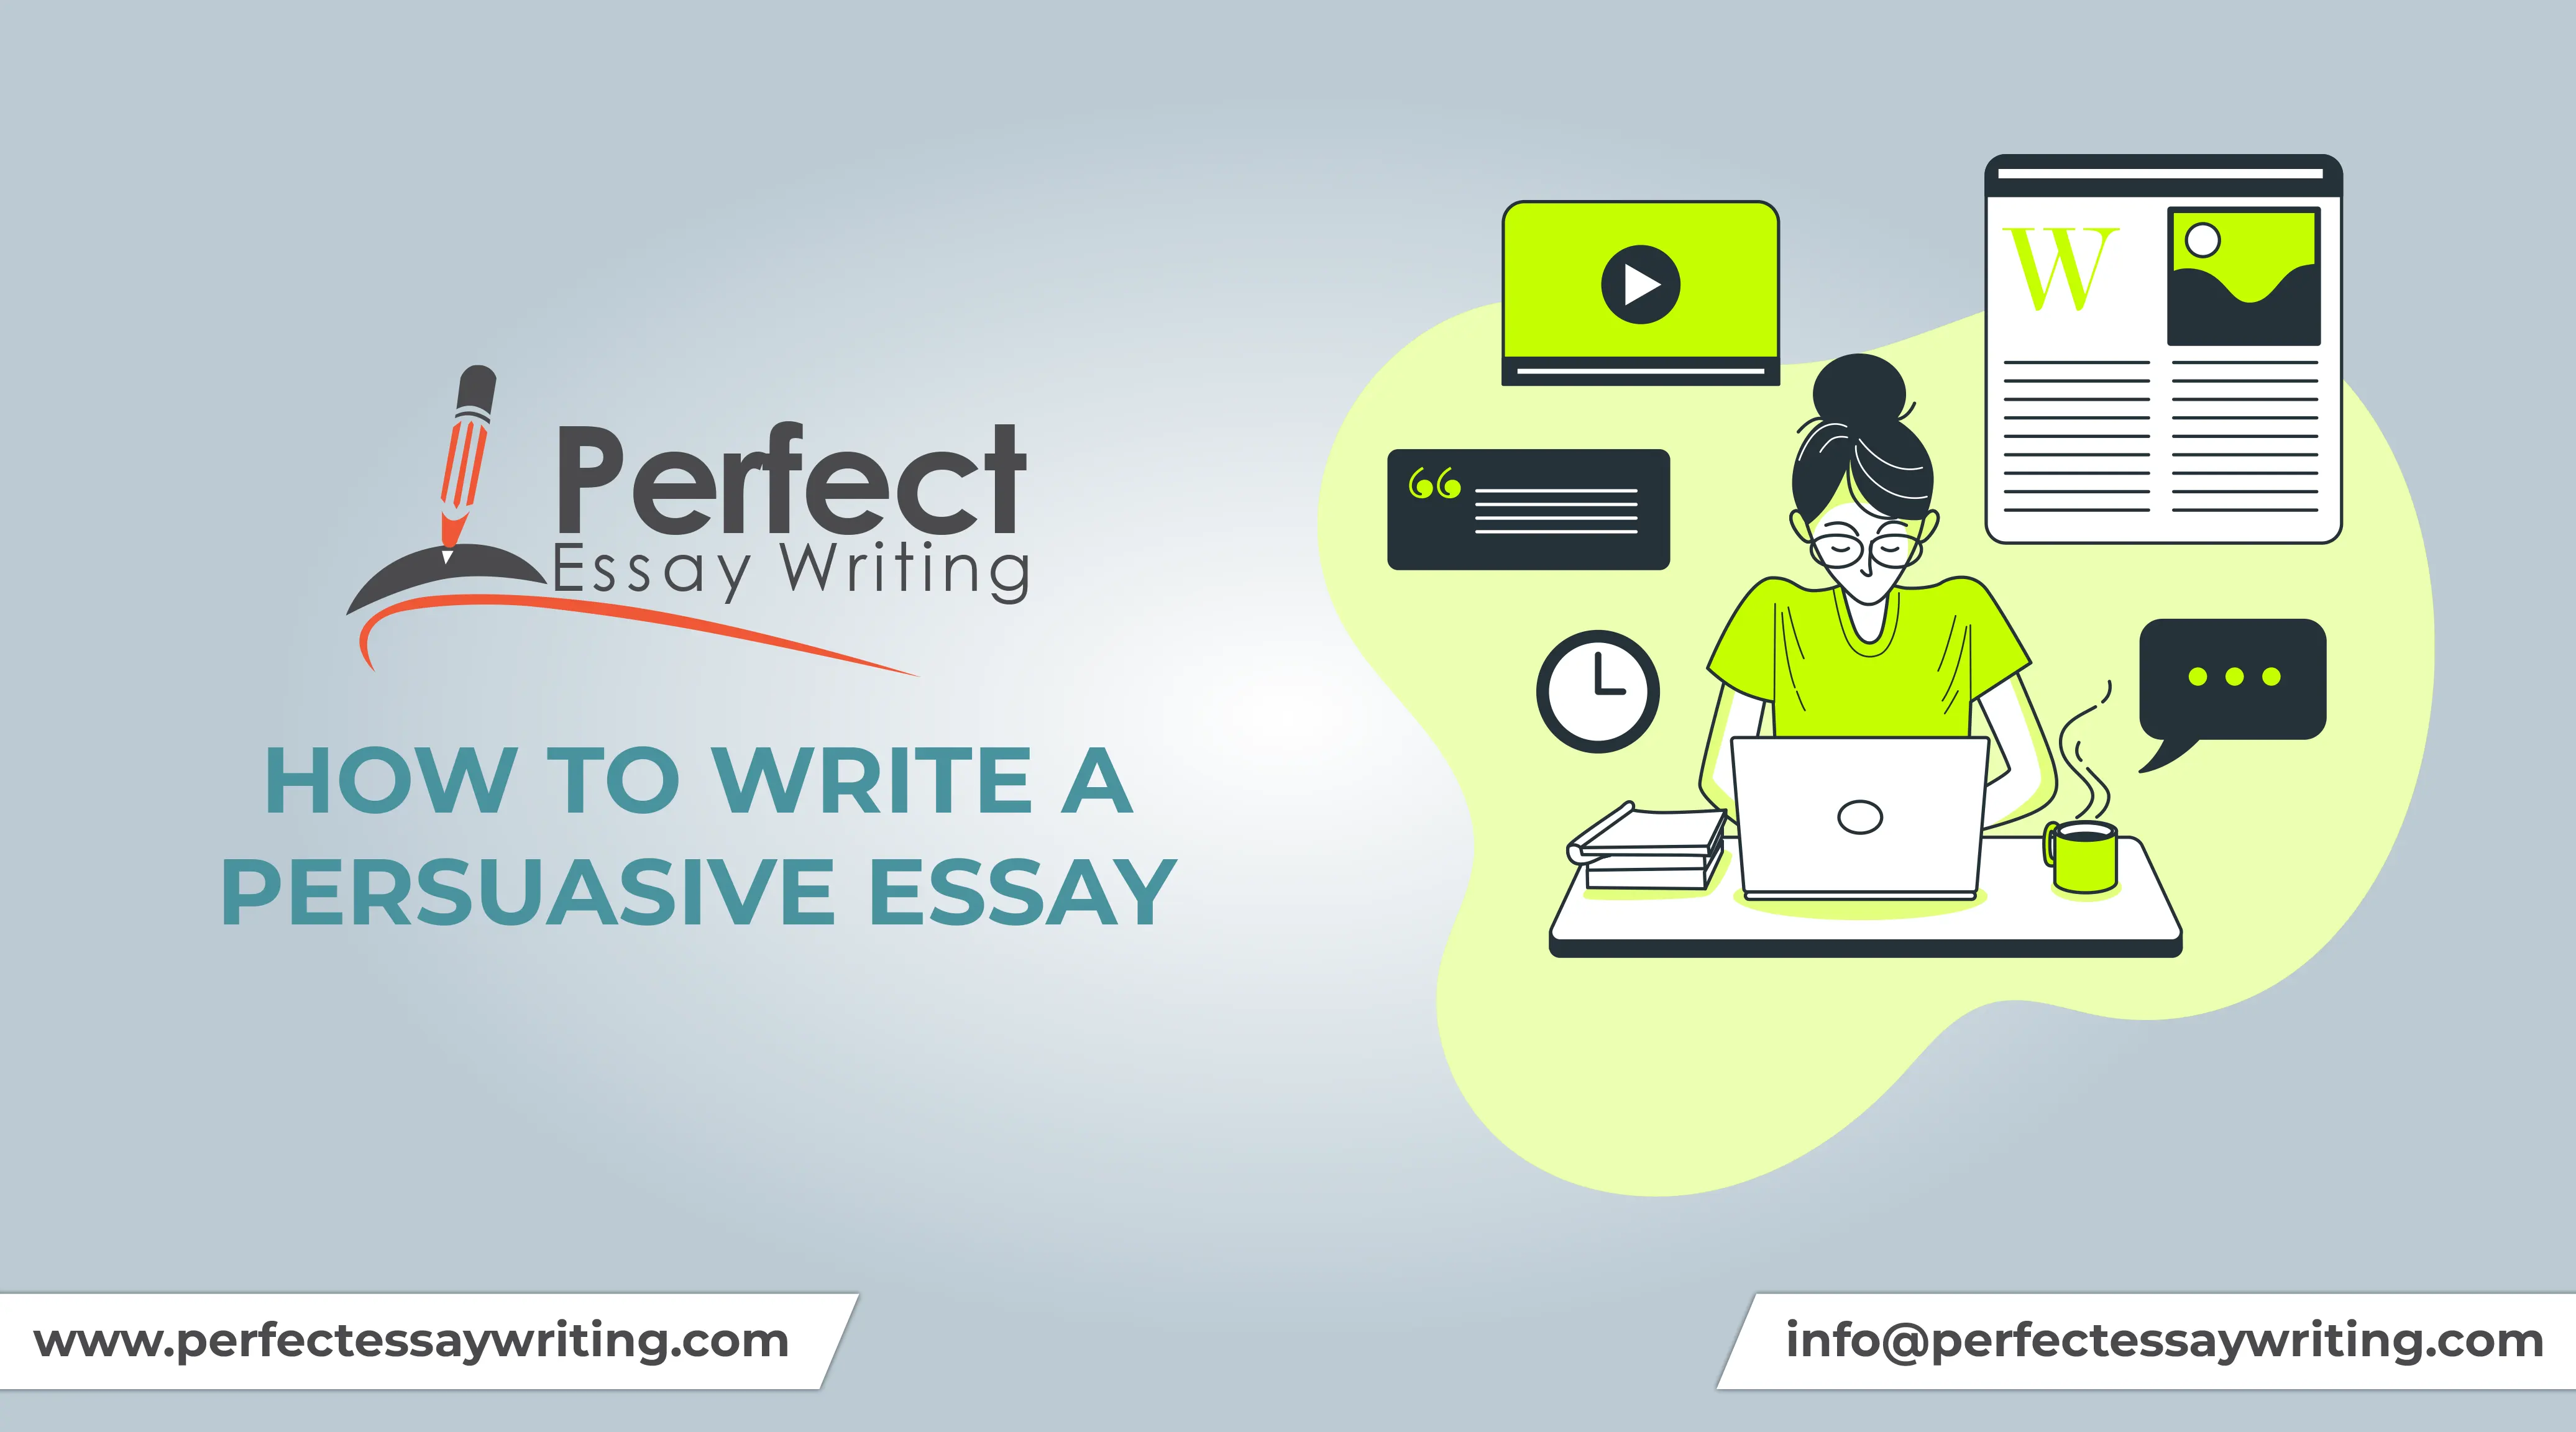 How to Write a Persuasive Essay: Step by Step Guide